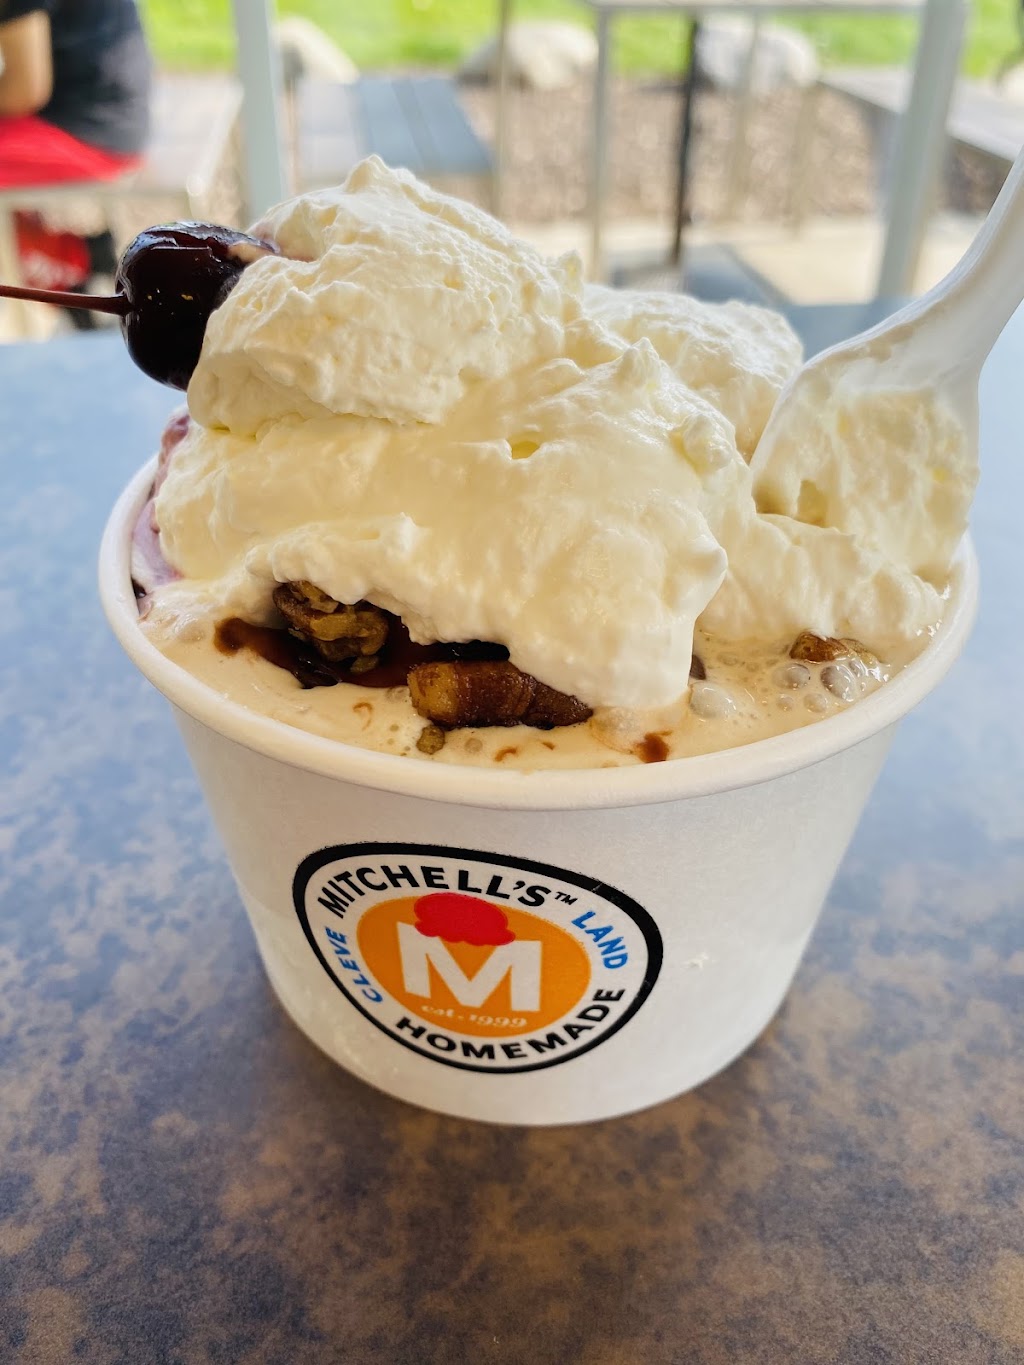 Mitchells Ice Cream (Rocky River Shop) | restaurant | 19700 Detroit Rd, Rocky River, OH 44116, USA | 4403334563 OR +1 440-333-4563